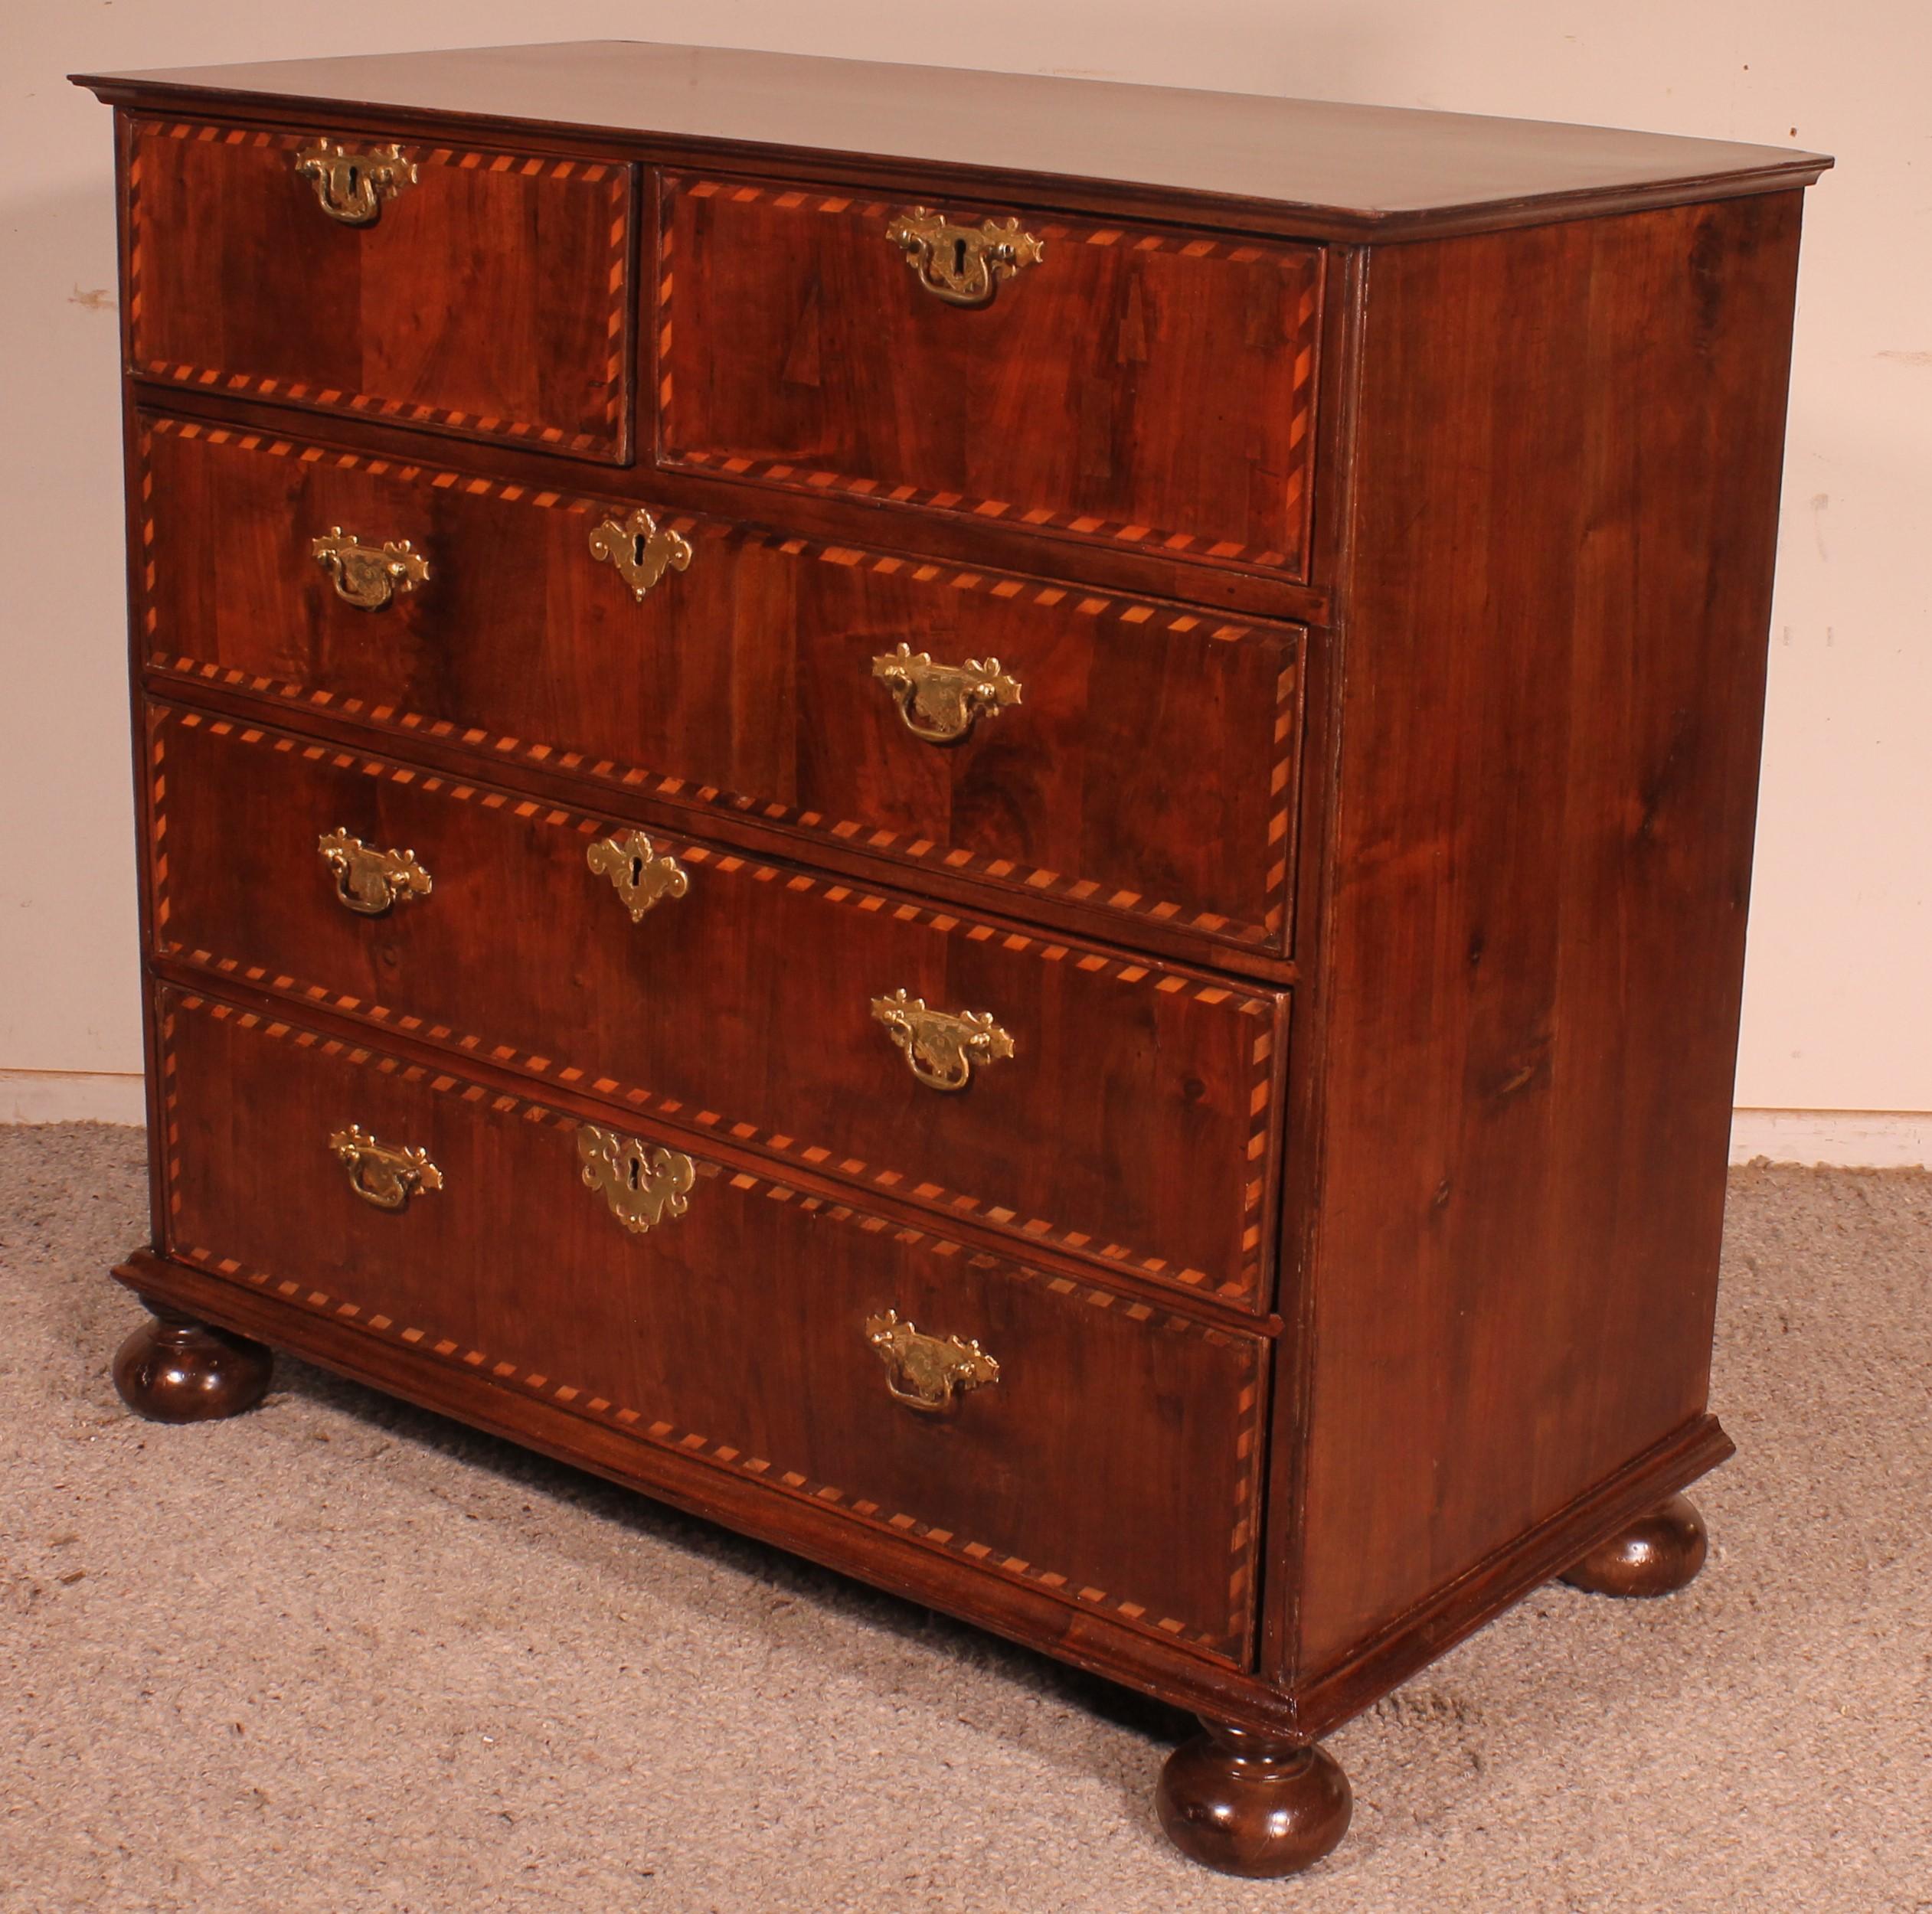 18th Century Queen Anne Chest of Drawers / Commode in Walnut circa 1700 For Sale